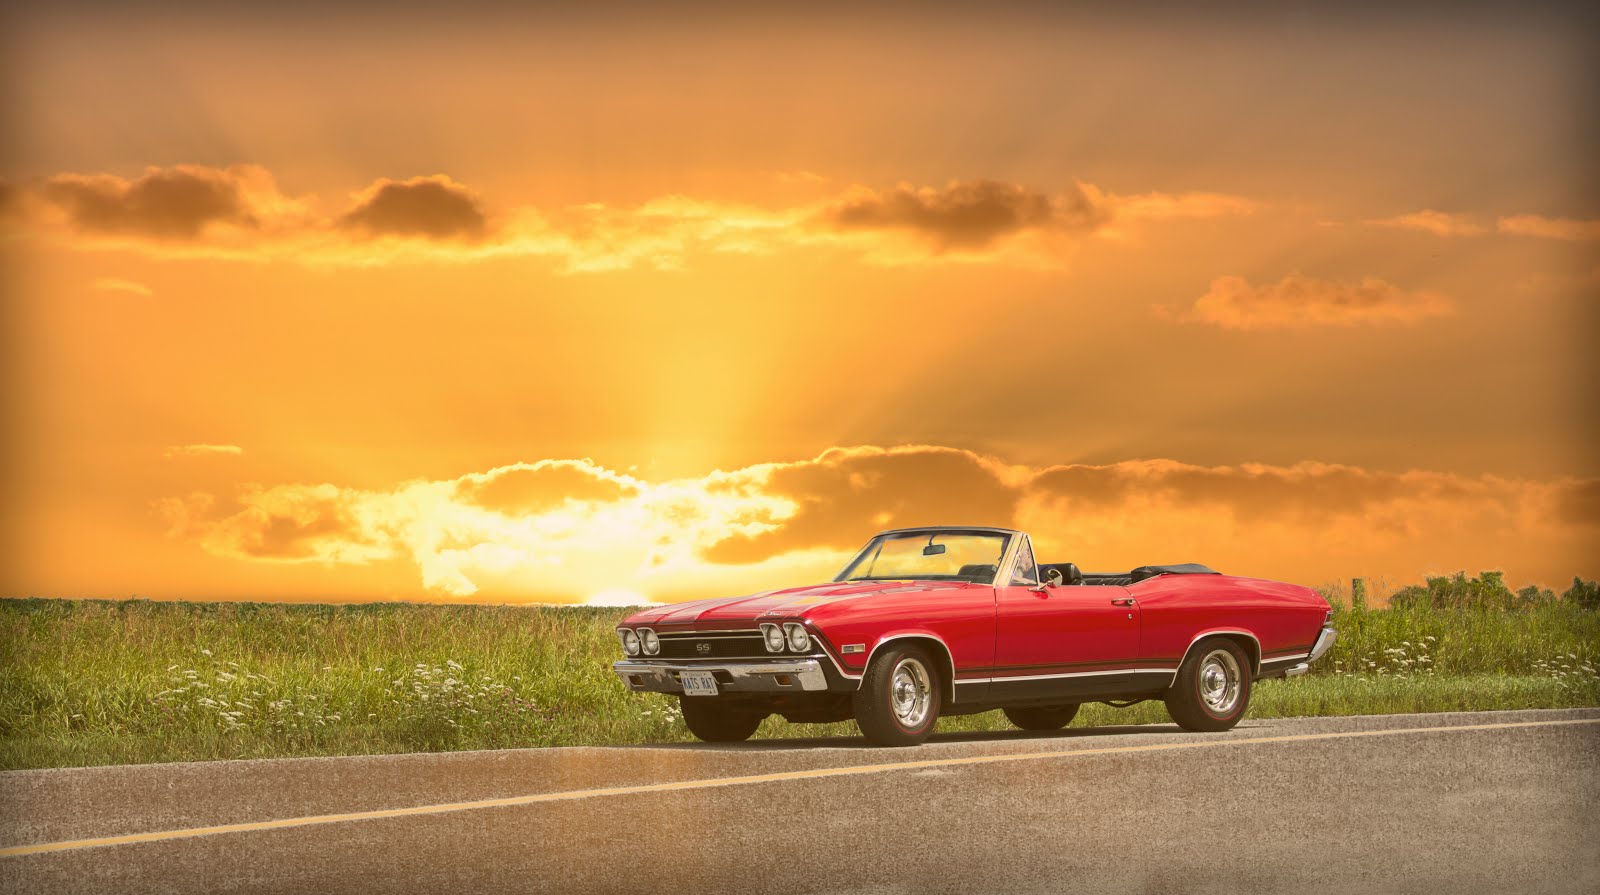 TELL US YOUR CLASSIC CAR STORY